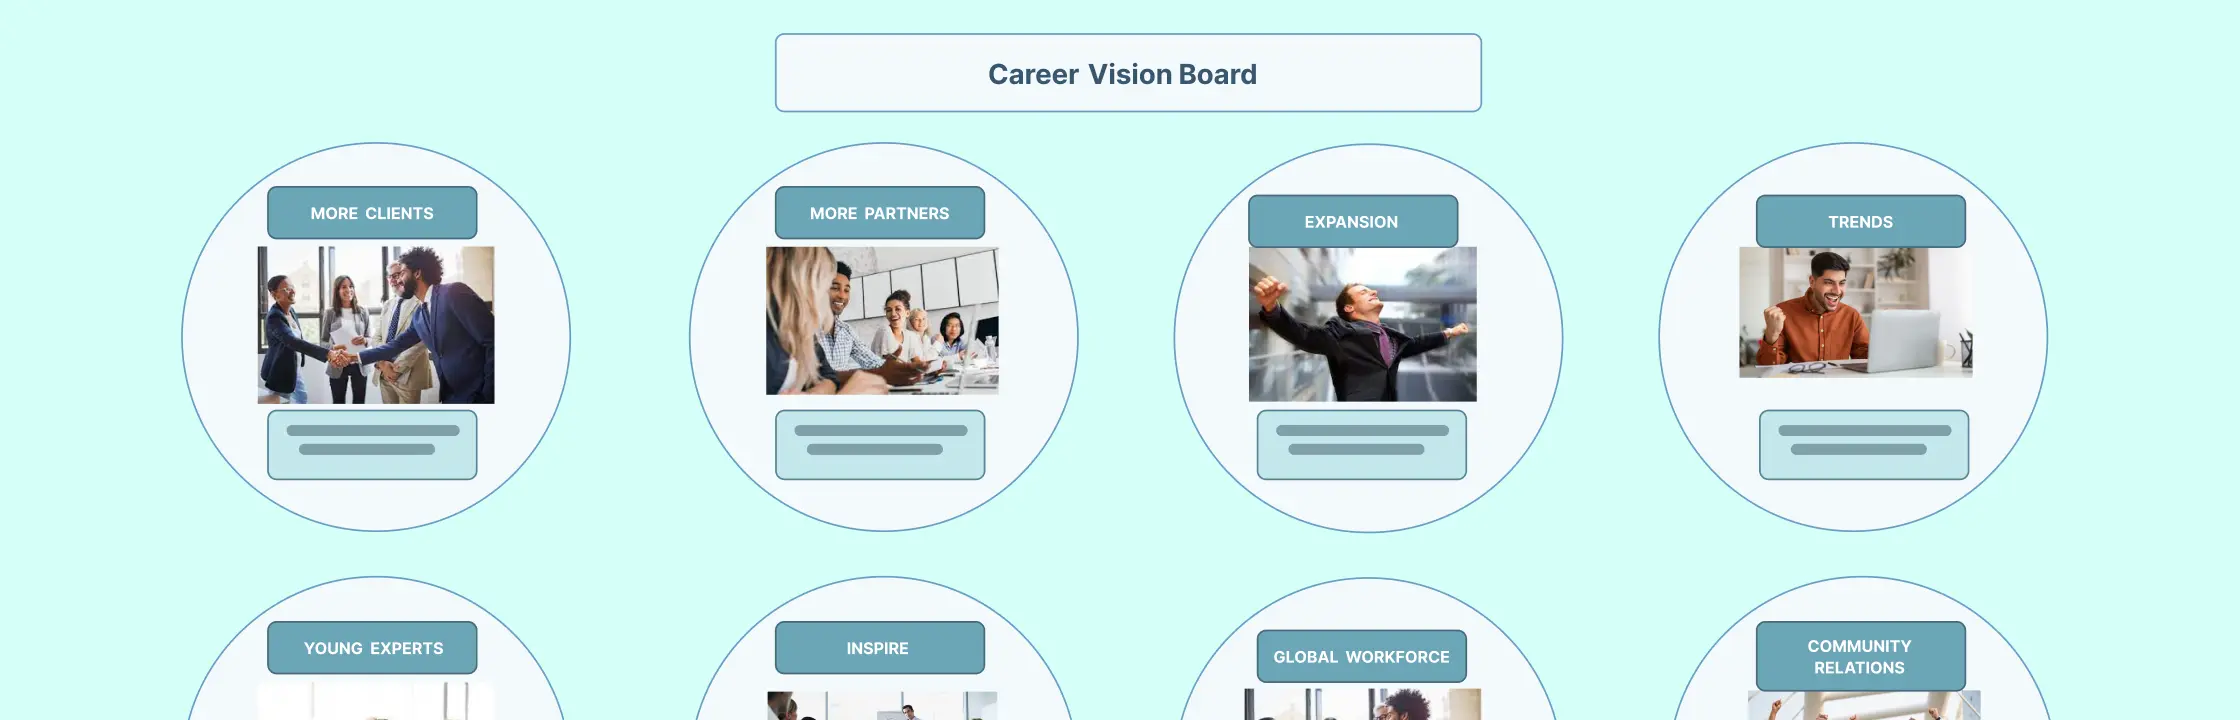 How to Create a Career Vision Board for Success